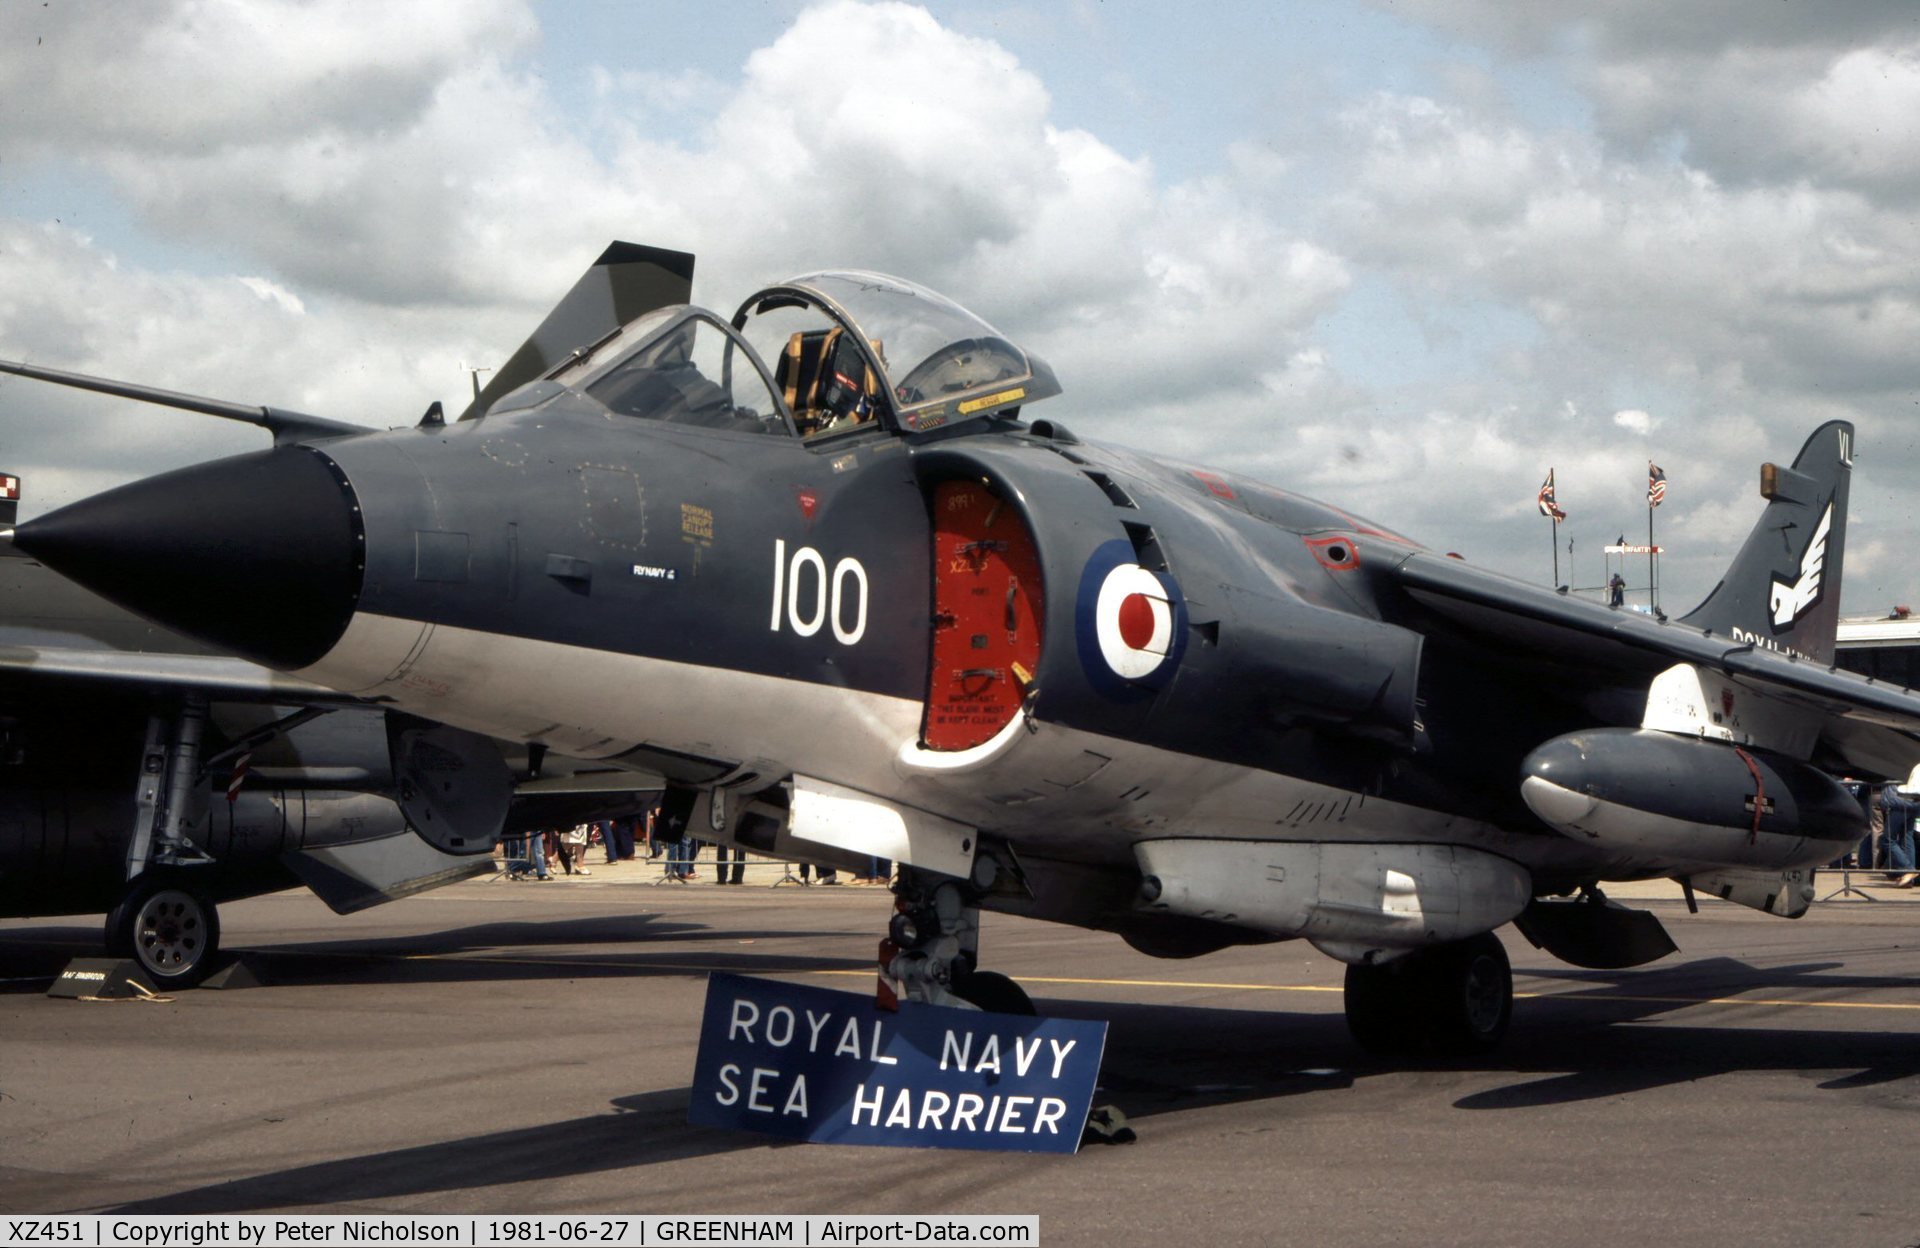 XZ451, 1979 British Aerospace Sea Harrier FRS.1 C/N 41H-912005, Sea Harrier FRS.1 of 899 Squadron at the 1981 Intnl Air Tattoo at RAF Greenham Common.